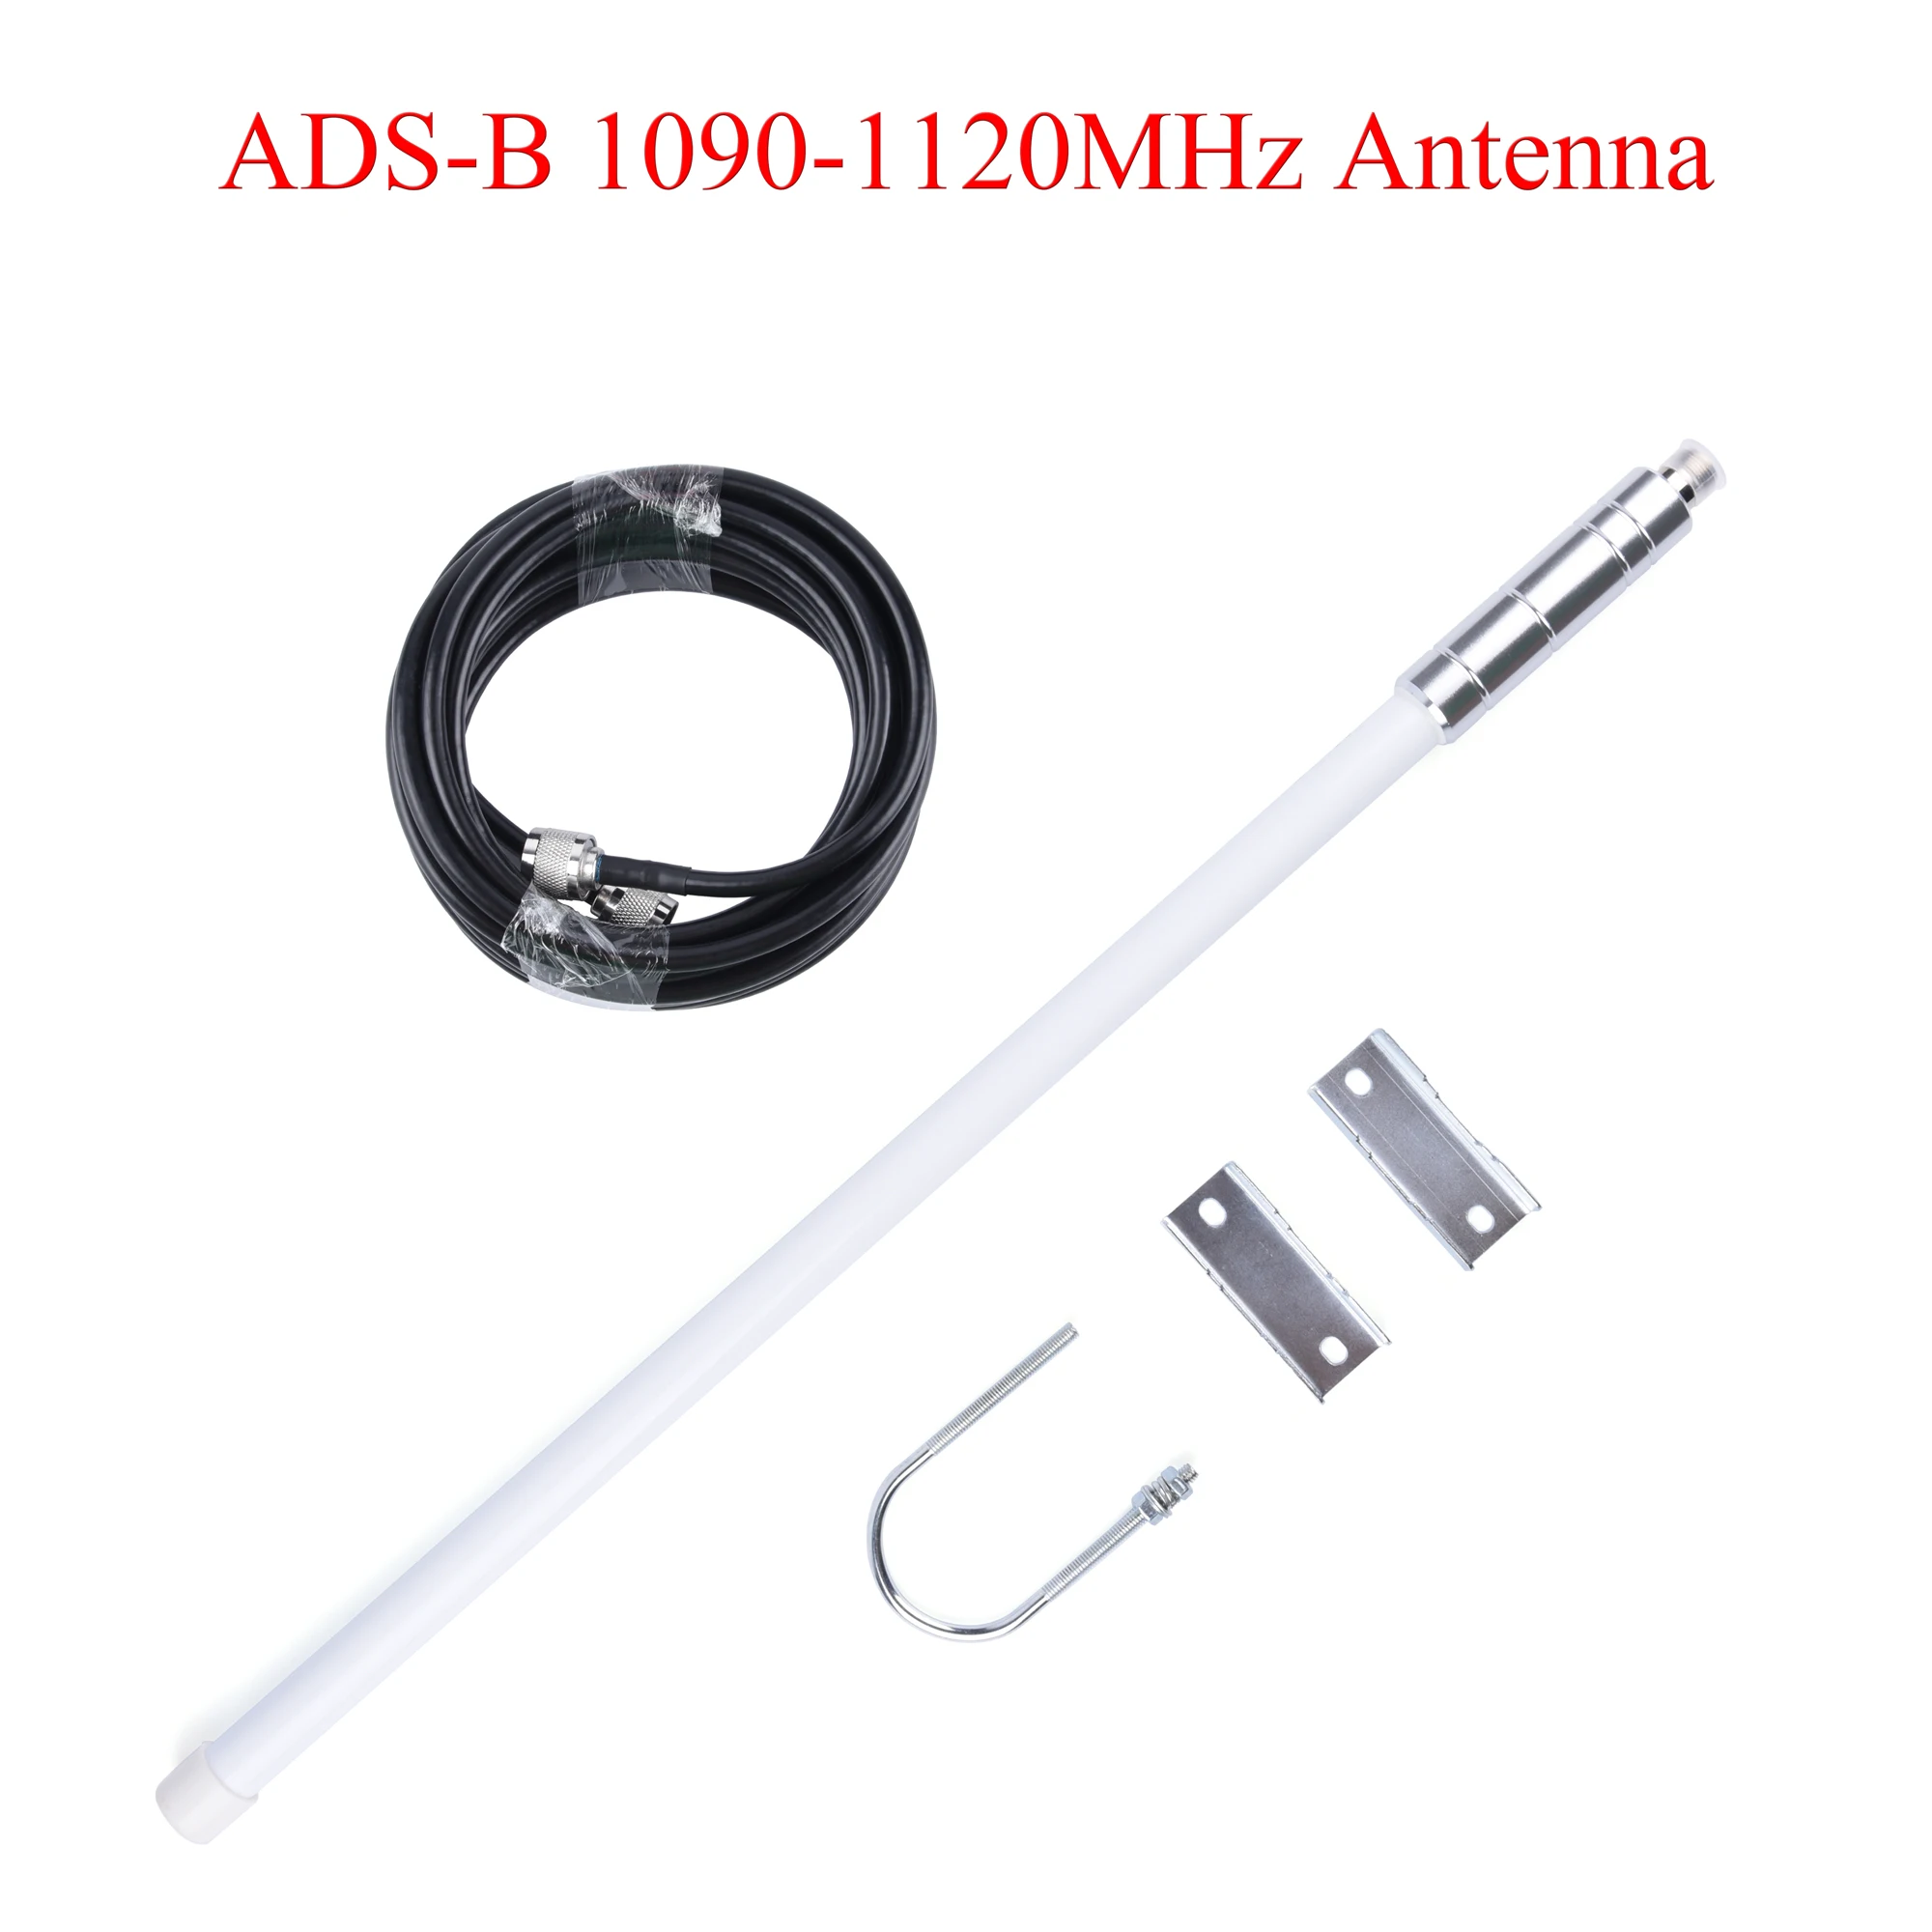 ADS-B Antenna 1090-1120MHz FRP Communication Antenna For Surveillance-Broadcast Air Traffic Control Ground FPV Aerial Drone